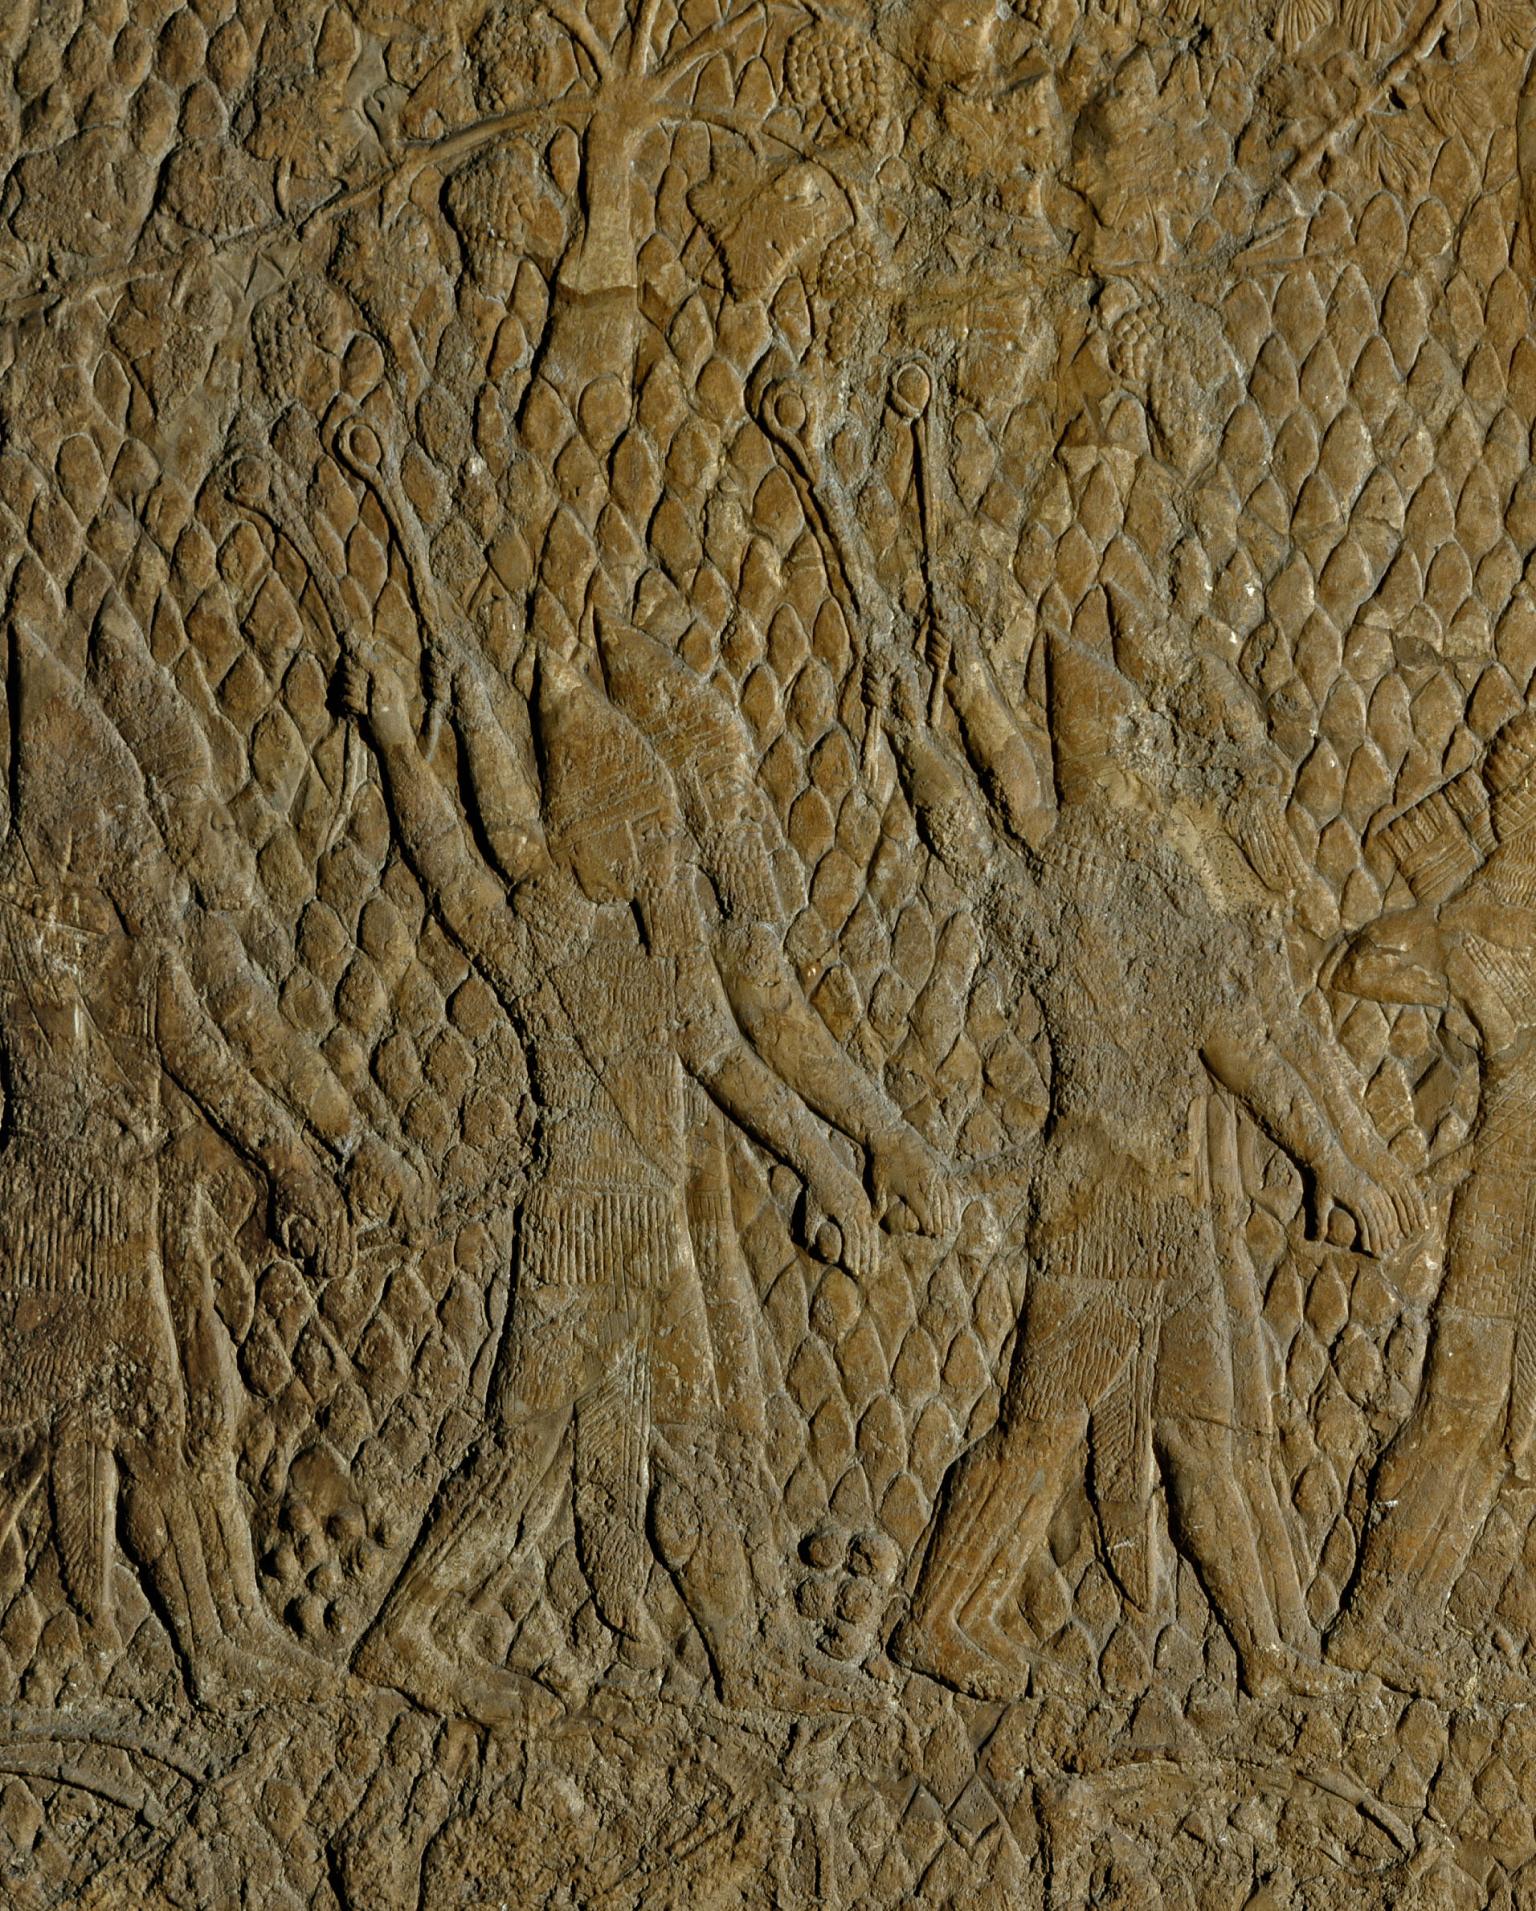 Relief with diamond pattern of people in cone-shaped hats swinging slingshots